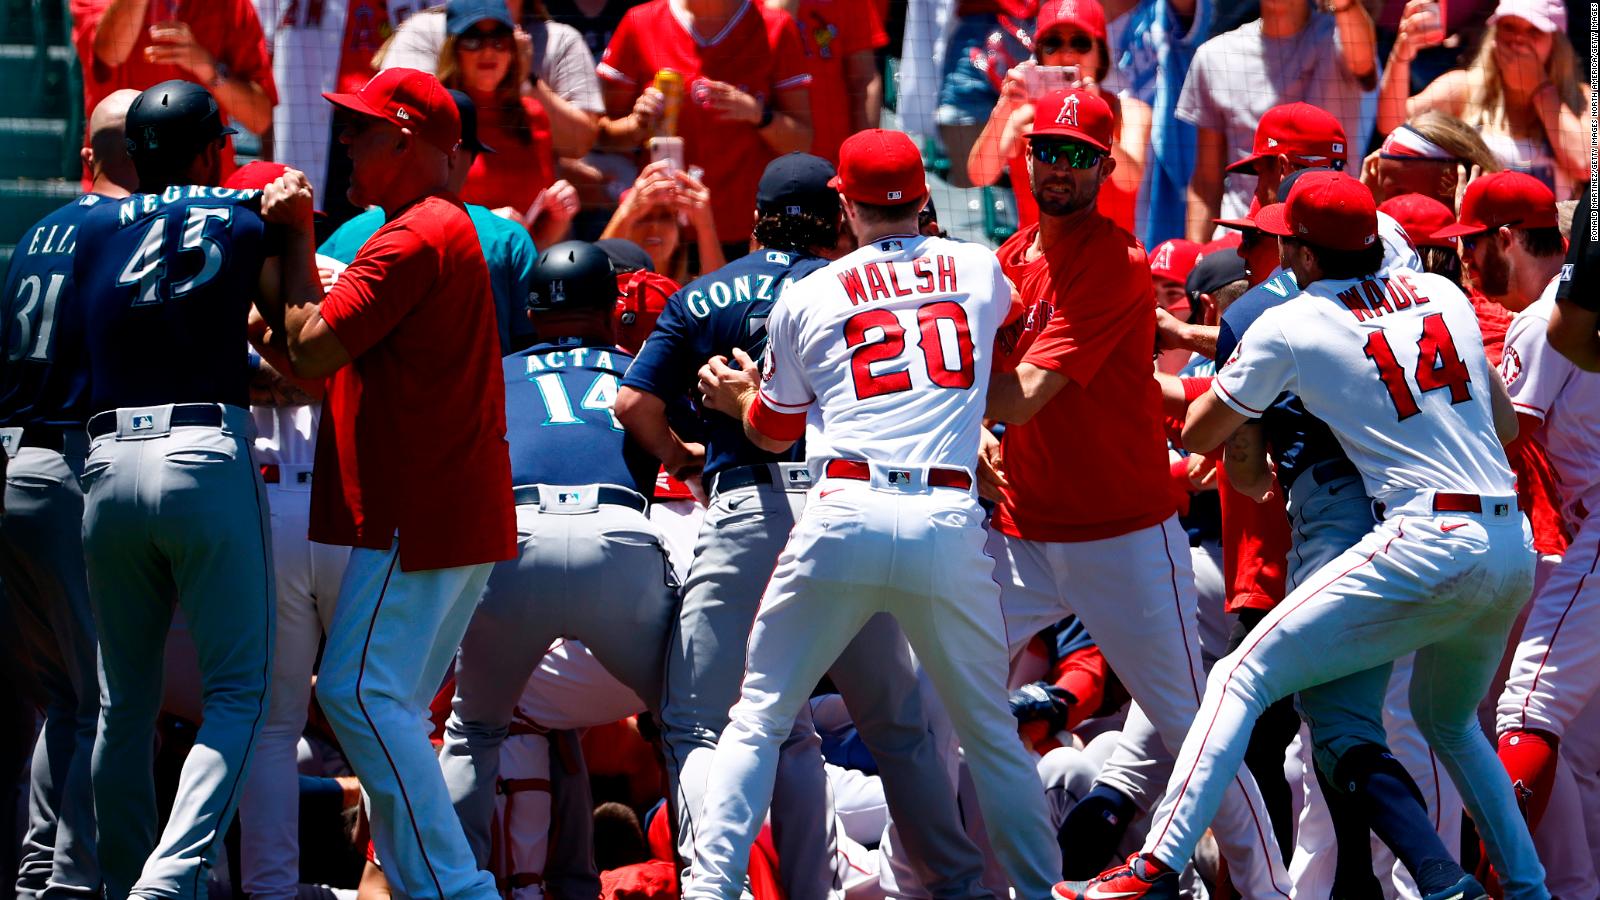 Angels vs Mariners Mass brawl and eight ejections overshadow Los